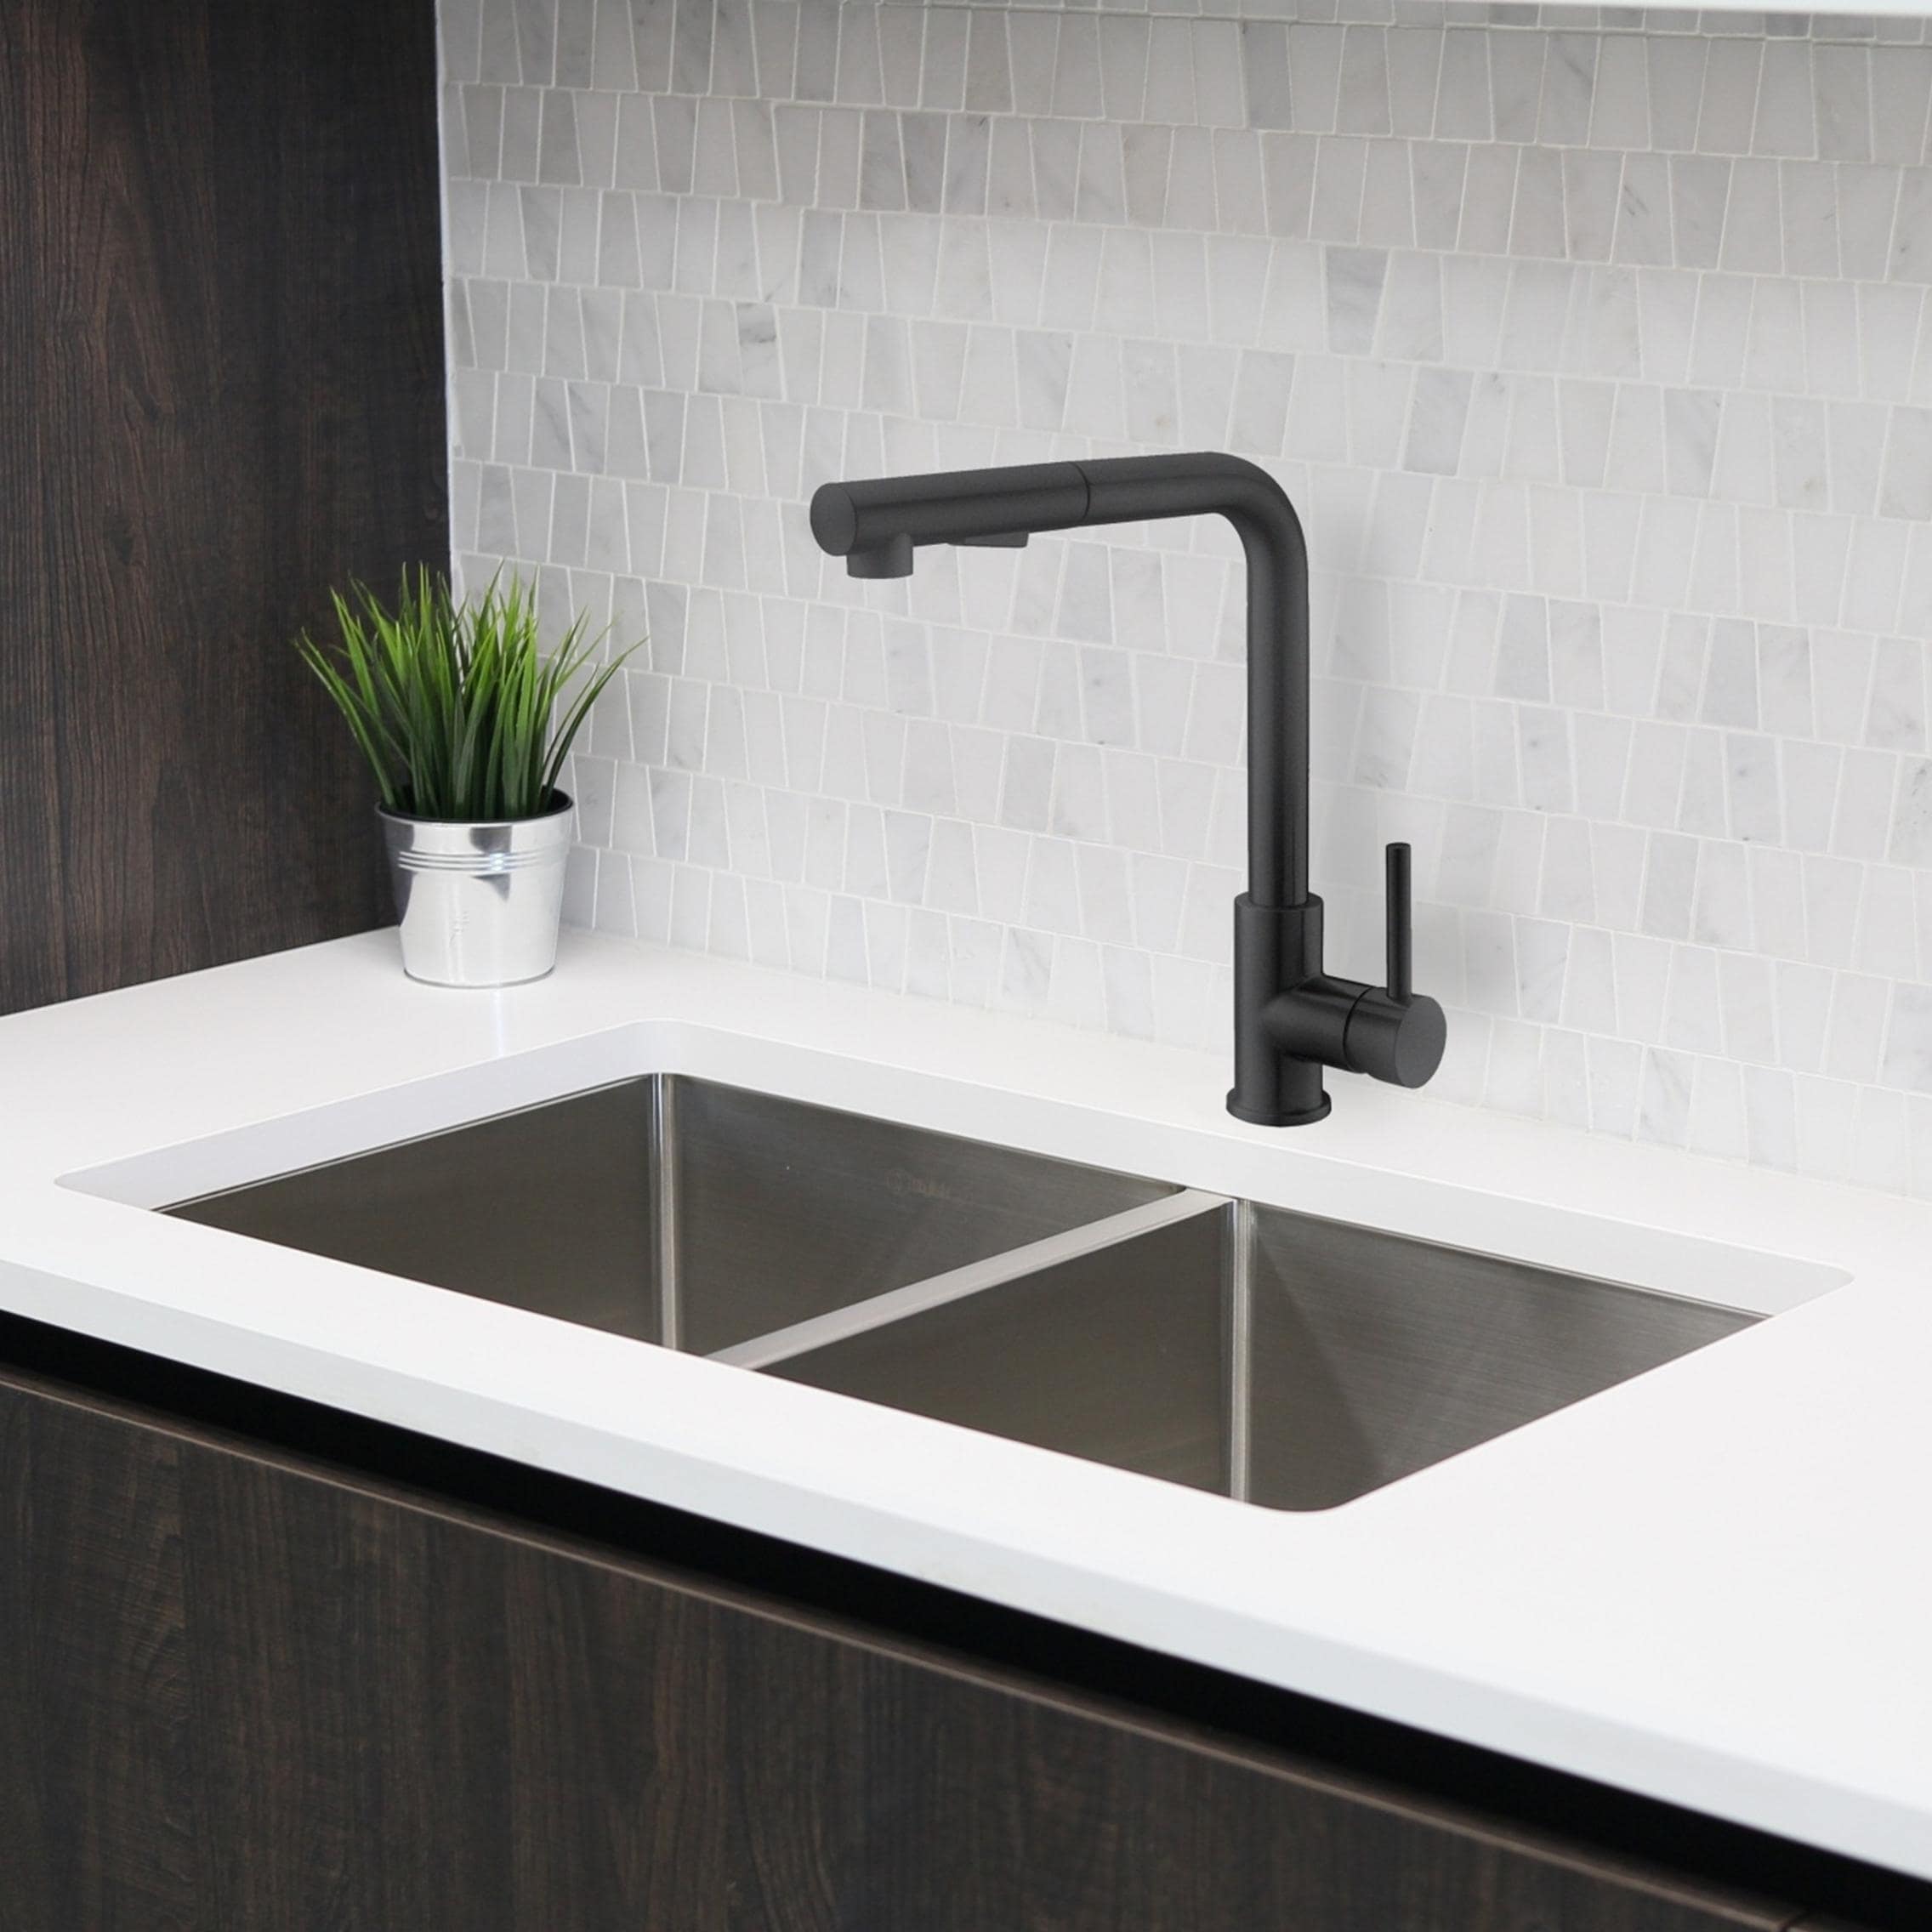 Solid Stainless Steel Sink Kitchen Faucet